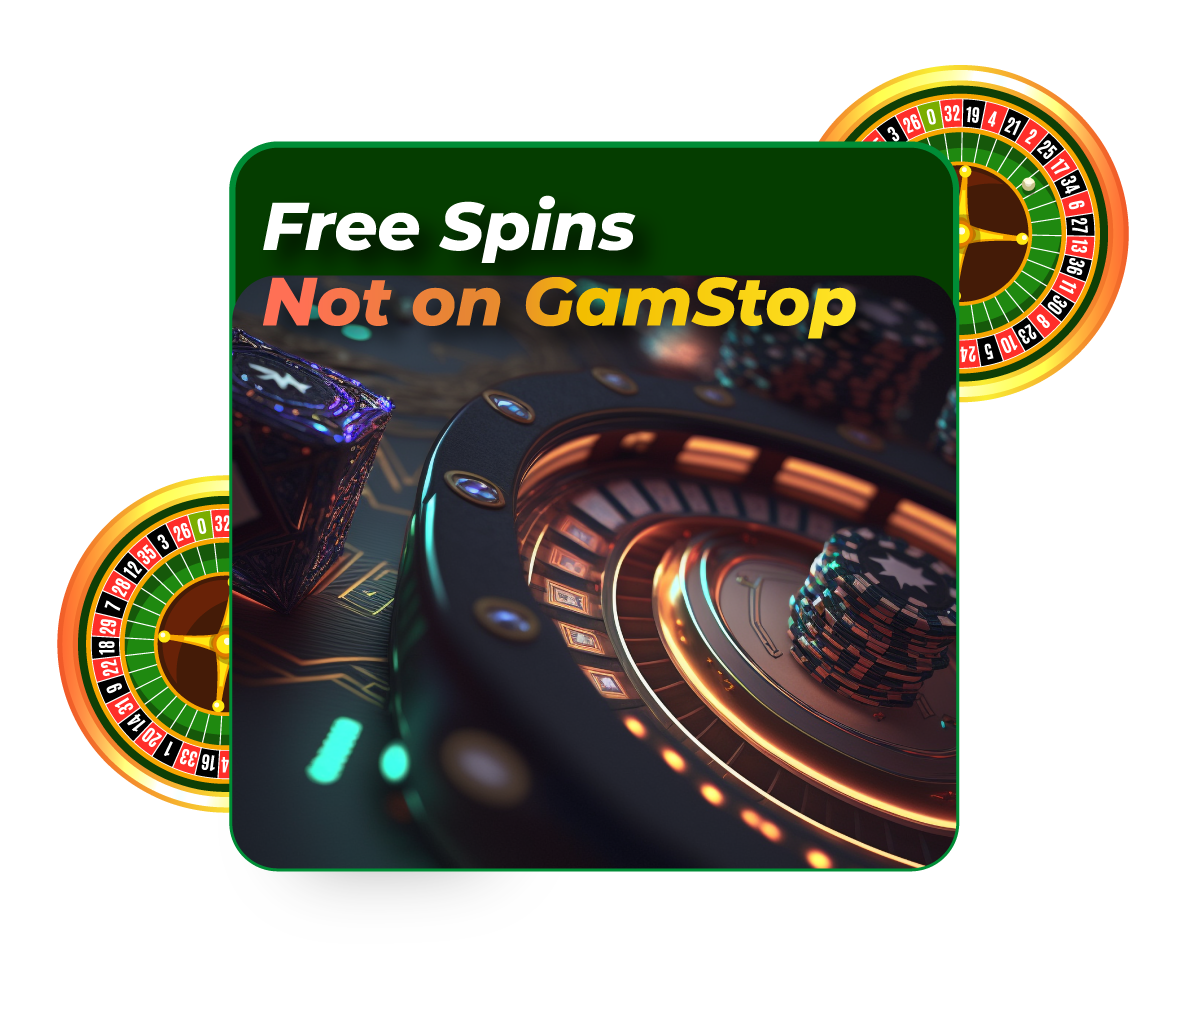 Free Spins Not on GamStop